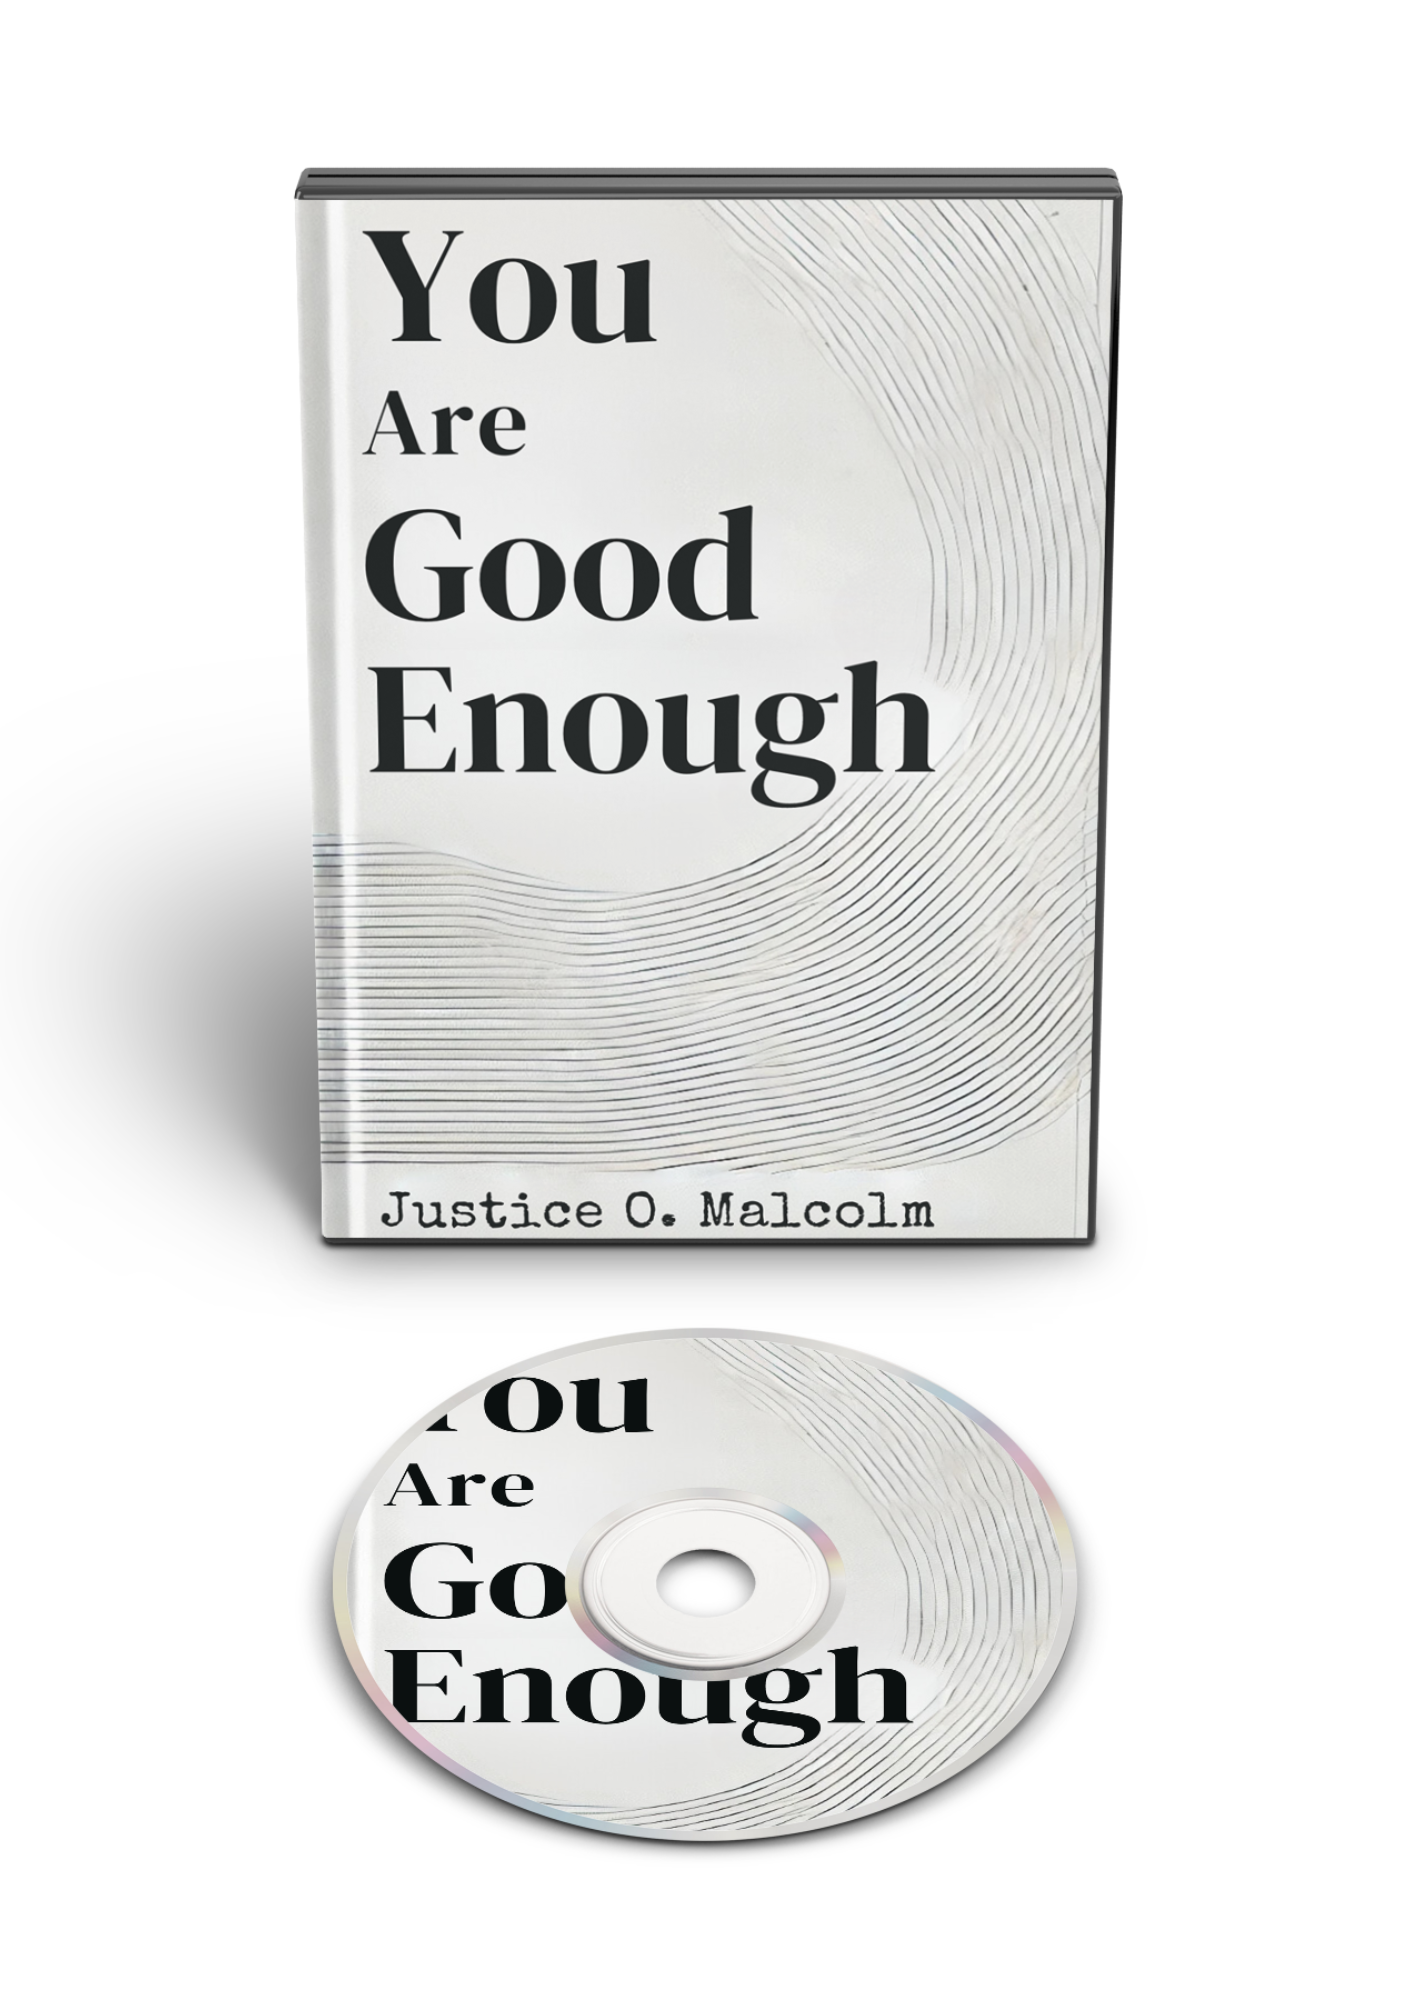 You Are Good Enough: If You Accept It, Unbelievable Things Happen (Audiobook)